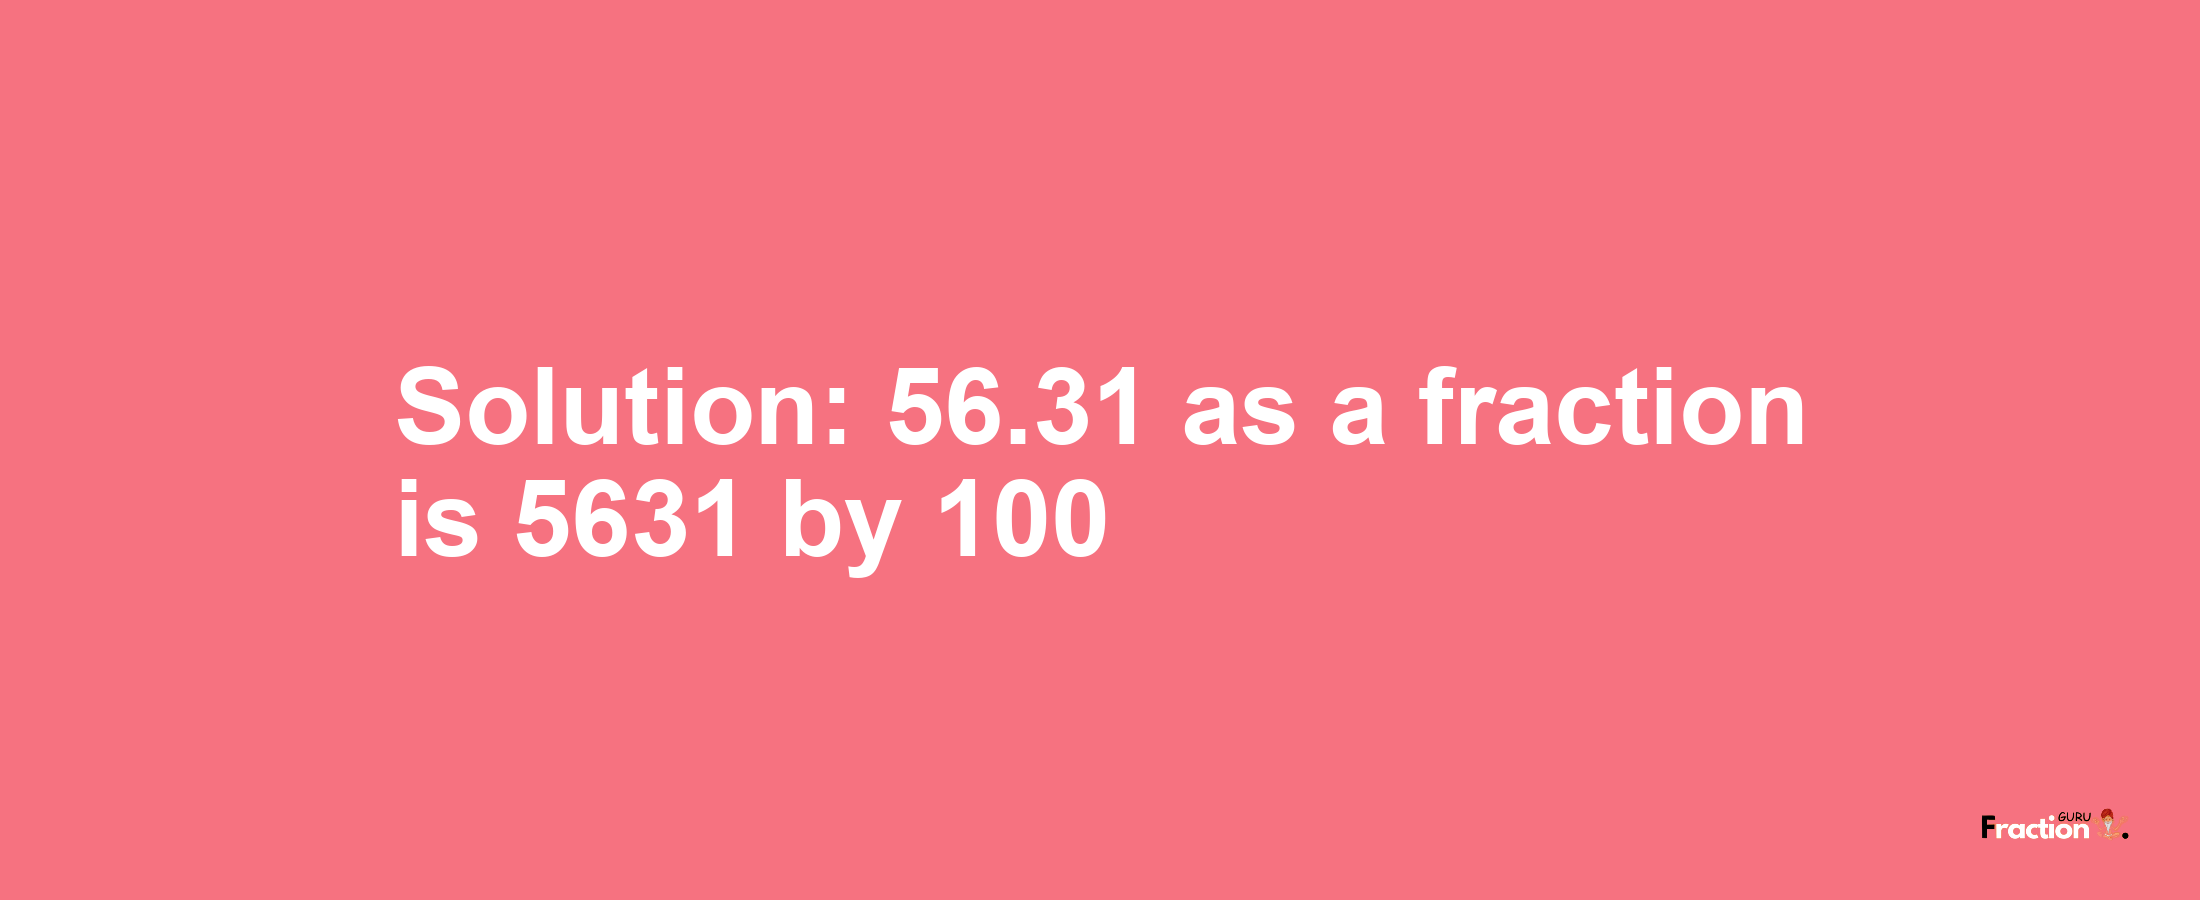 Solution:56.31 as a fraction is 5631/100